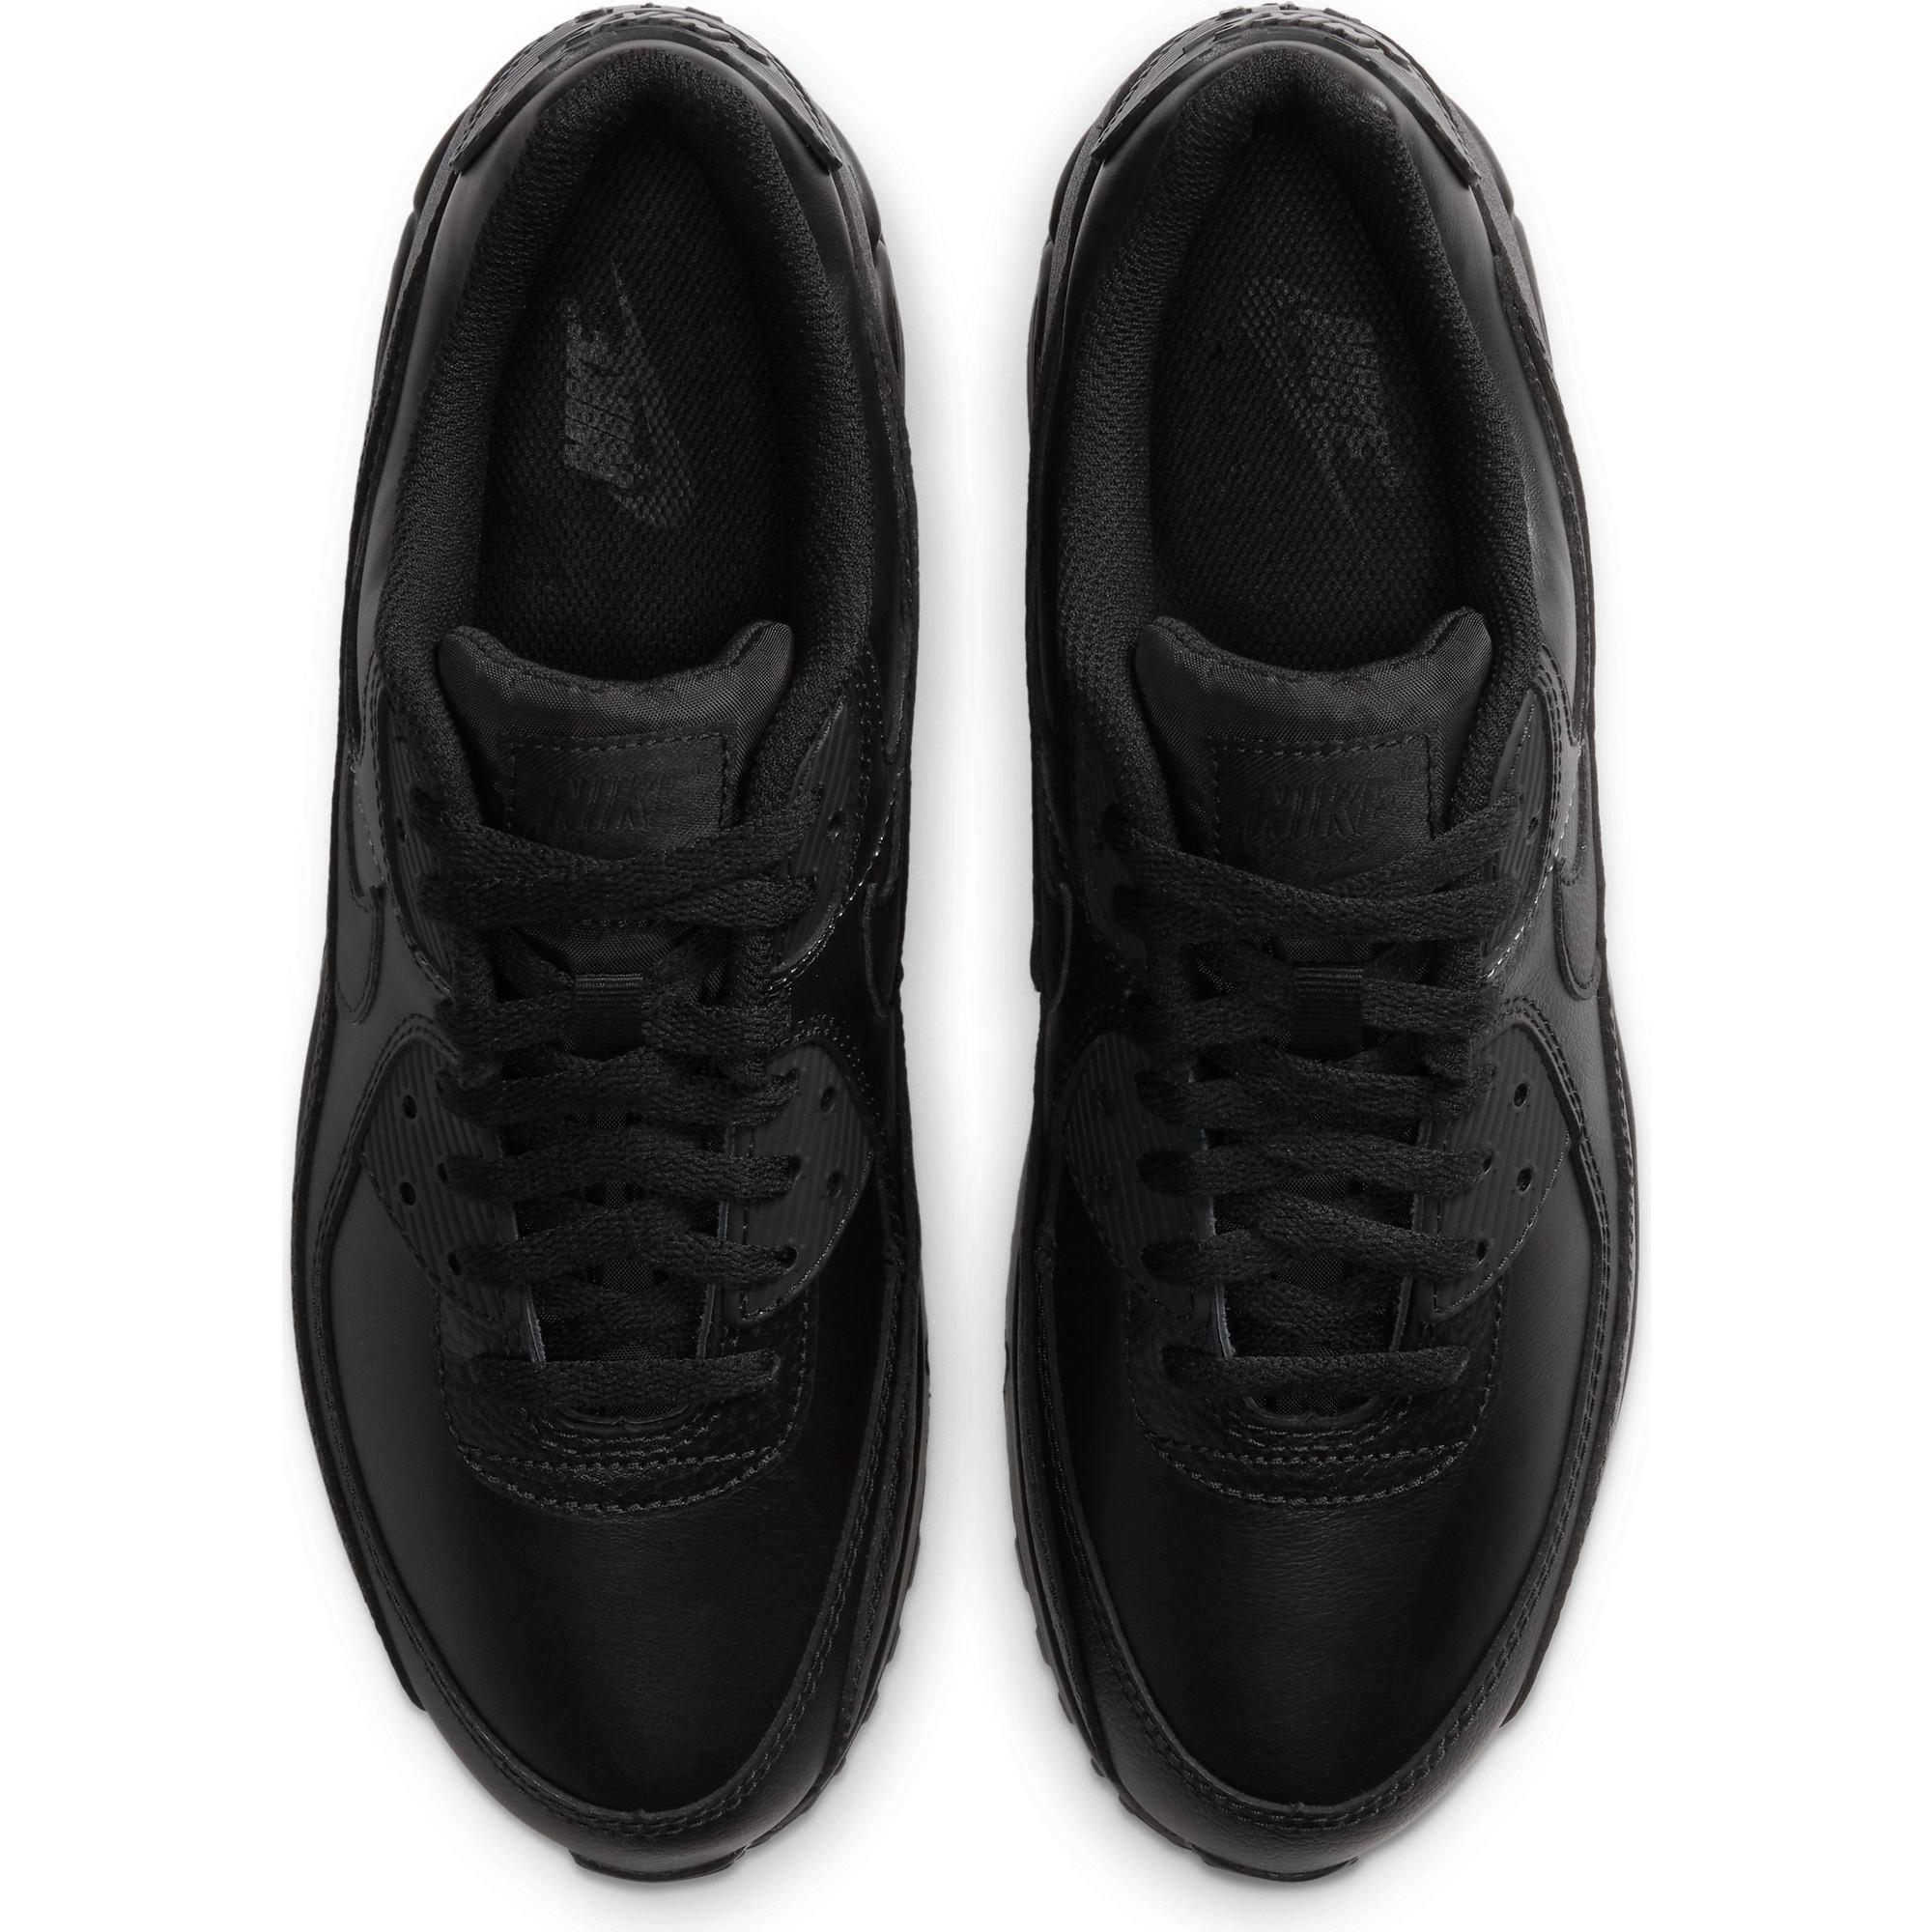 Nike Air Max Leather "Black" Men's Shoes